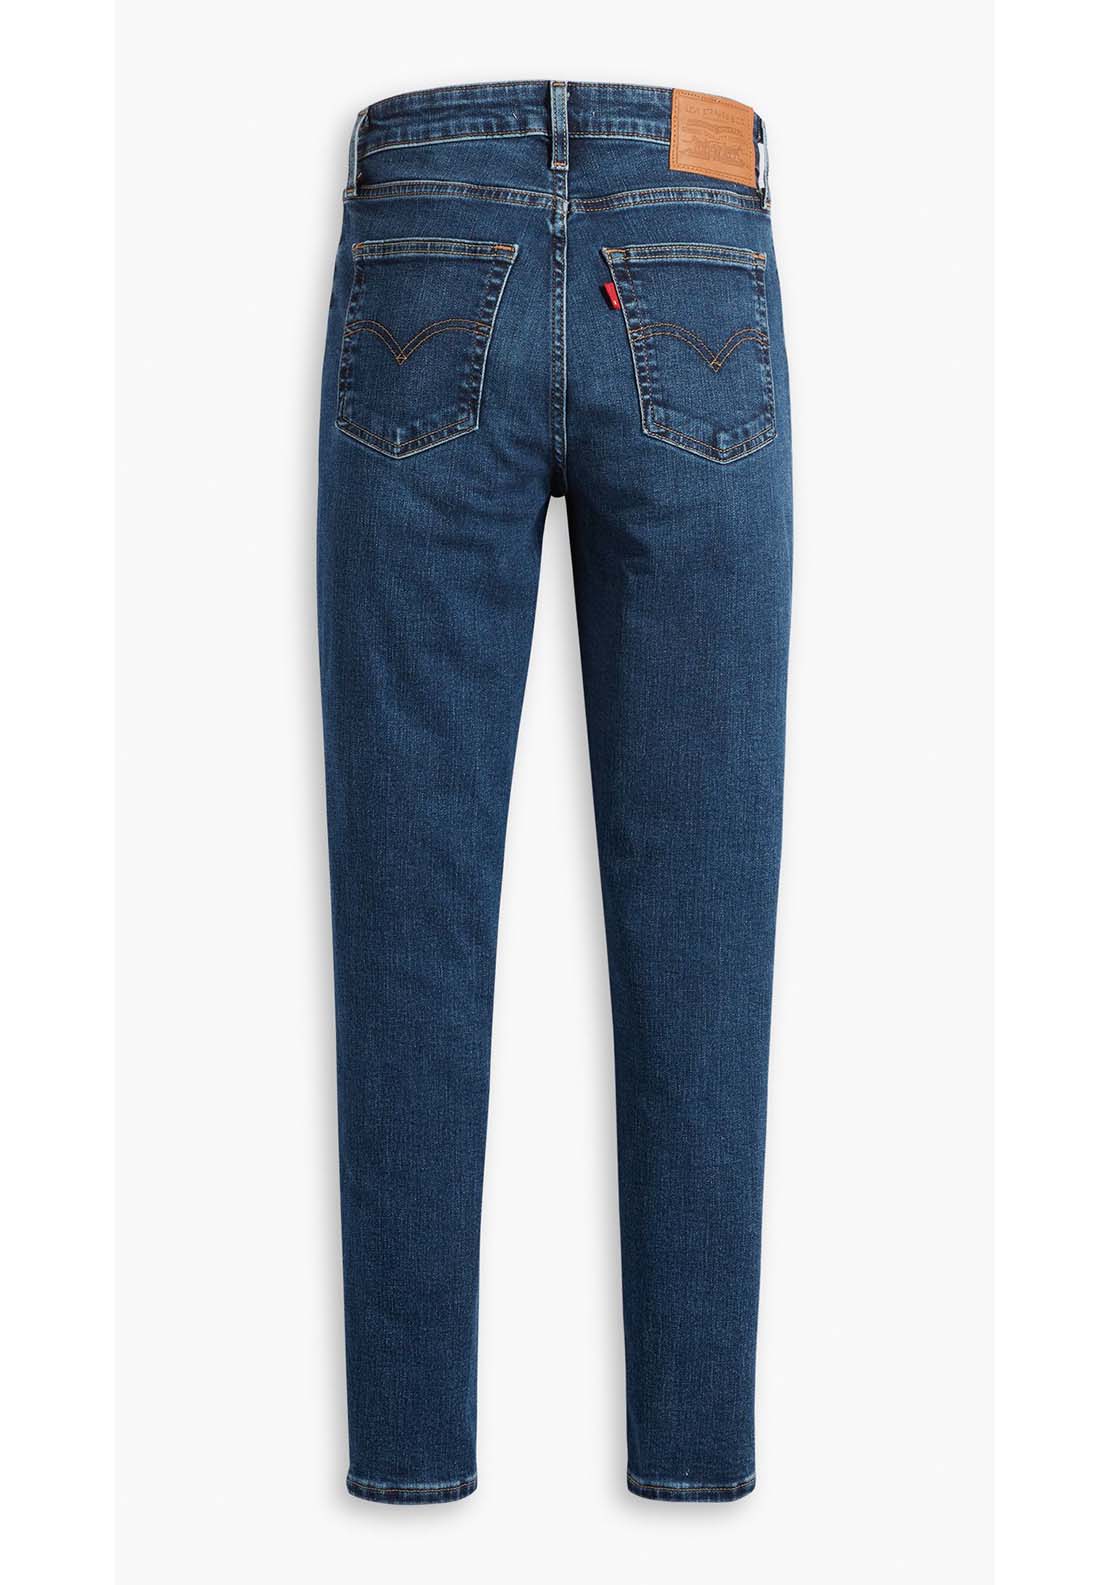 Levis 721 High Rise Skinny Jean 8 Shaws Department Stores